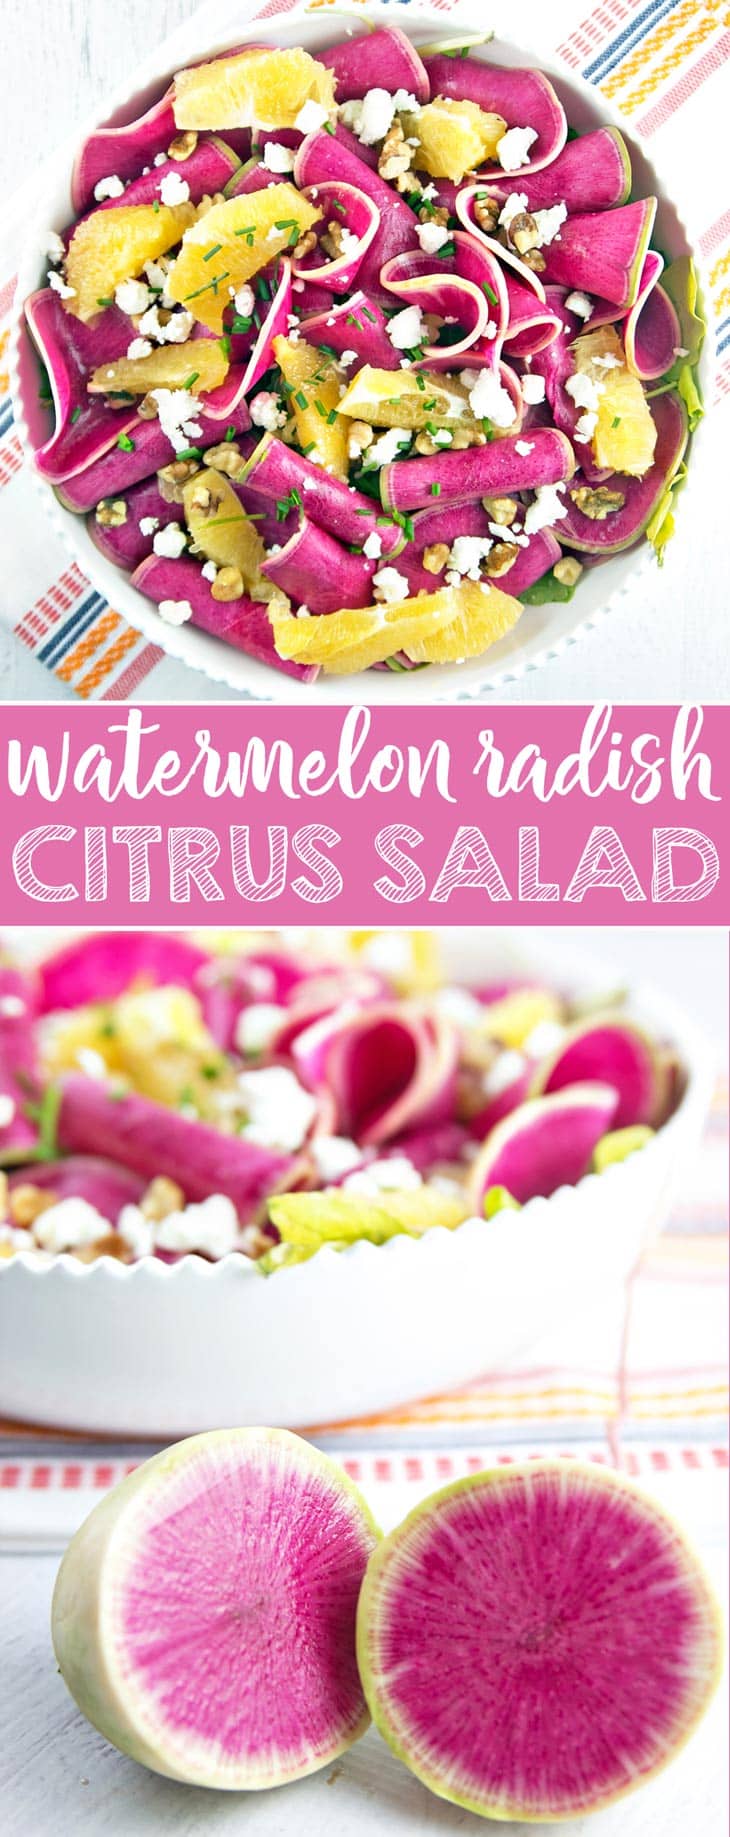 Watermelon Radish and Citrus Salad: thinly sliced watermelon radishes paired with winter citrus, candied walnuts, and tangy goat cheese make a beautiful spring salad. {Bunsen Burner Bakery}